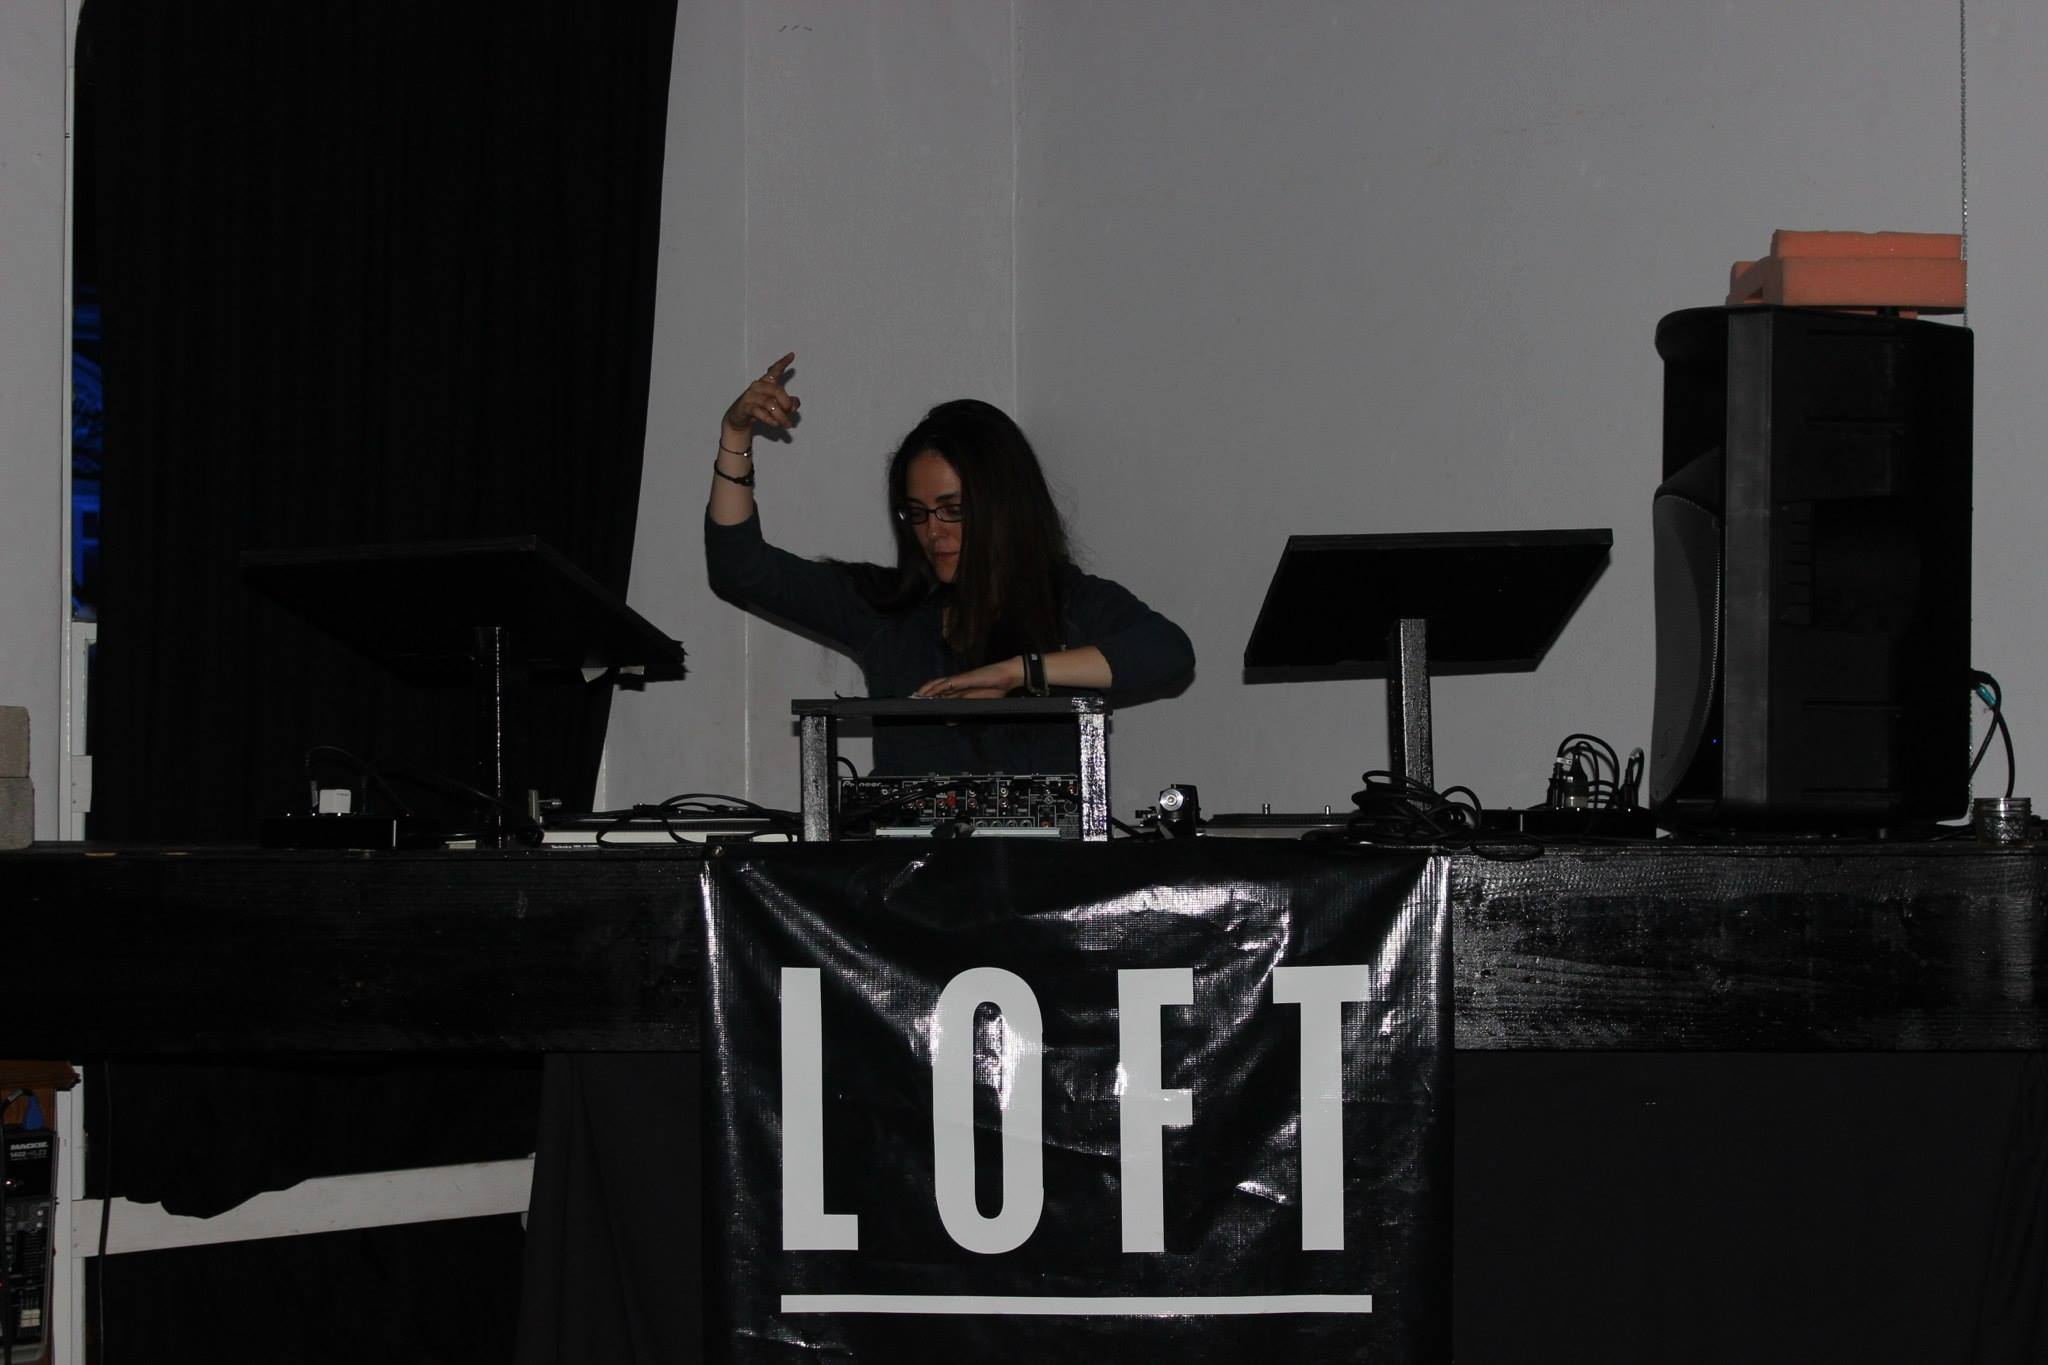 Gina plays DJ for a night at the cast party for 